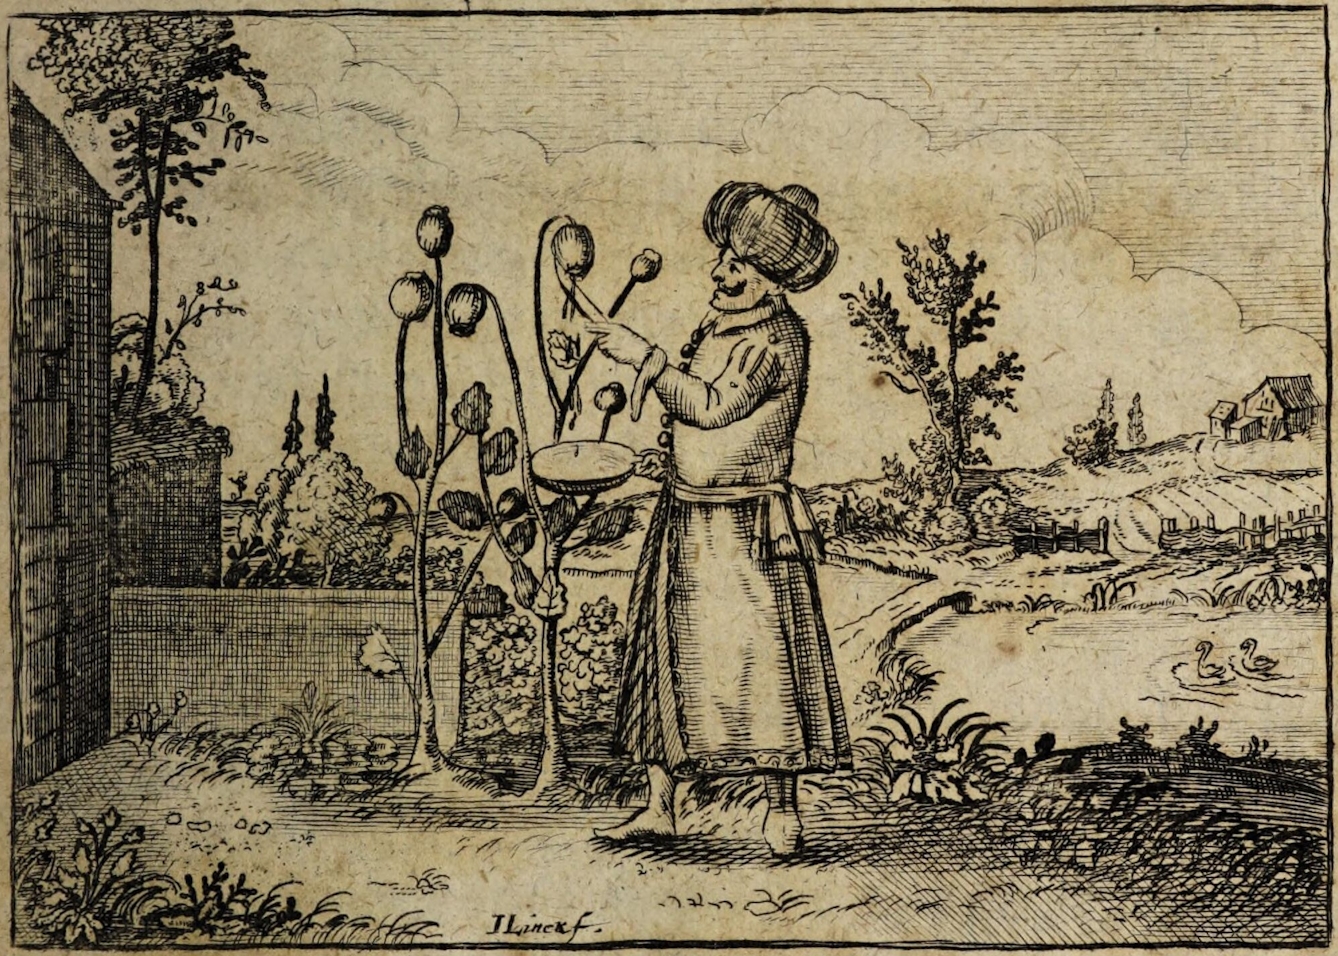 An image from an 18th-century book showing a man in a turban harvesting opium poppies.